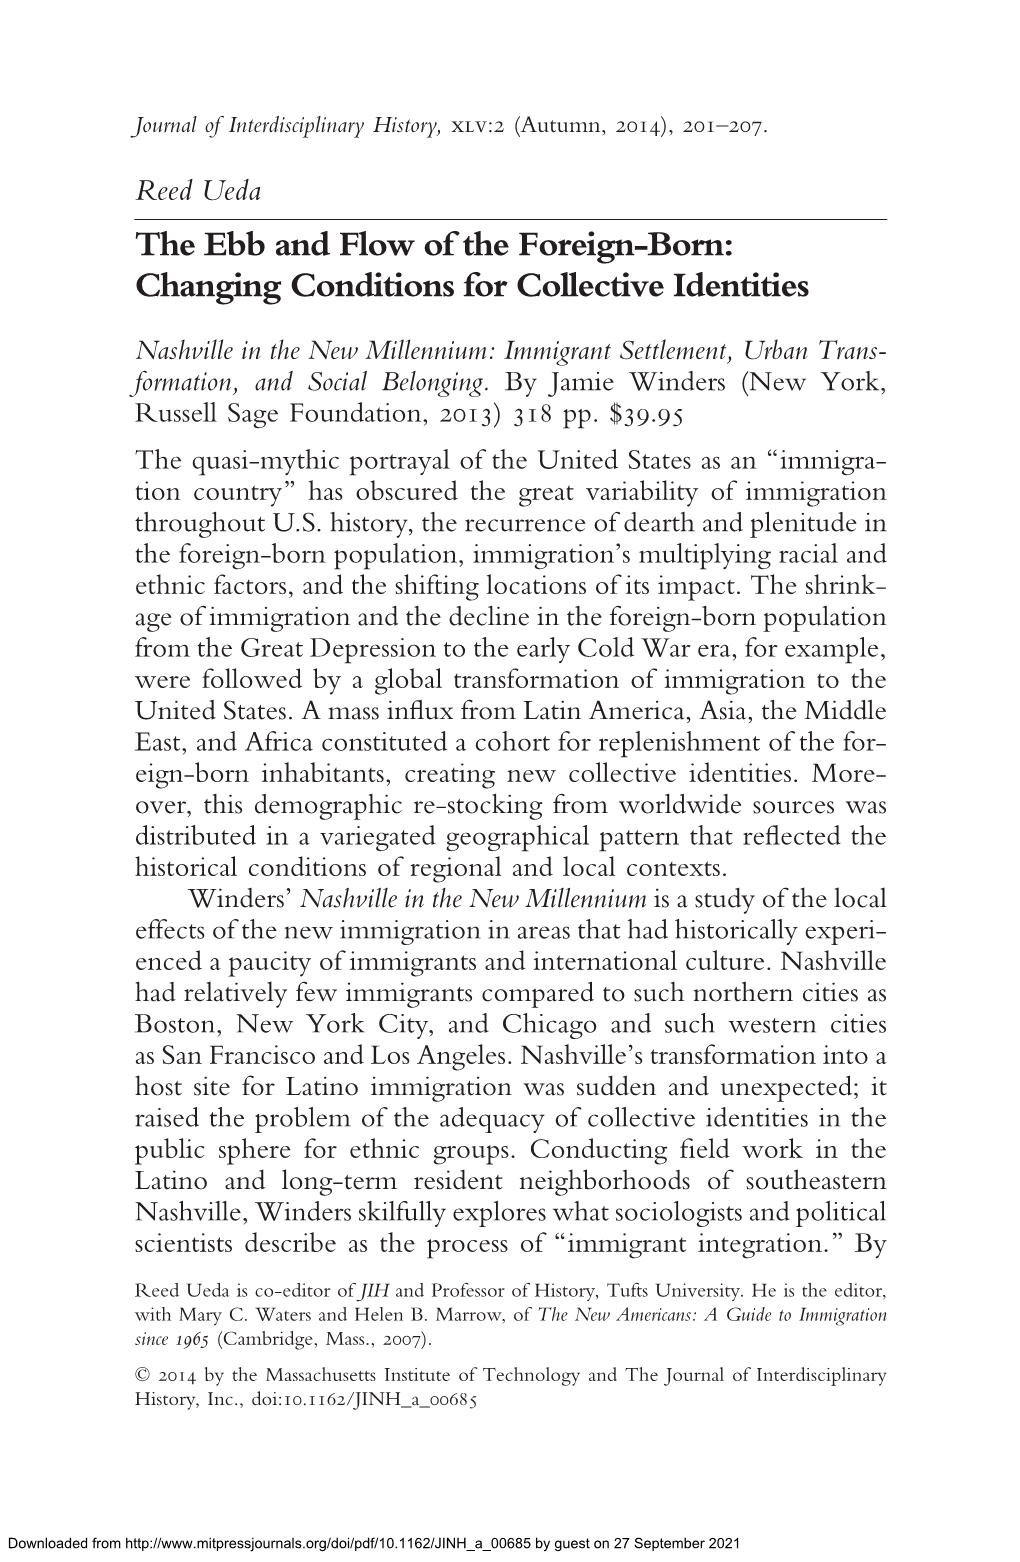 The Ebb and Flow of the Foreign-Born: Changing Conditions for Collective Identities